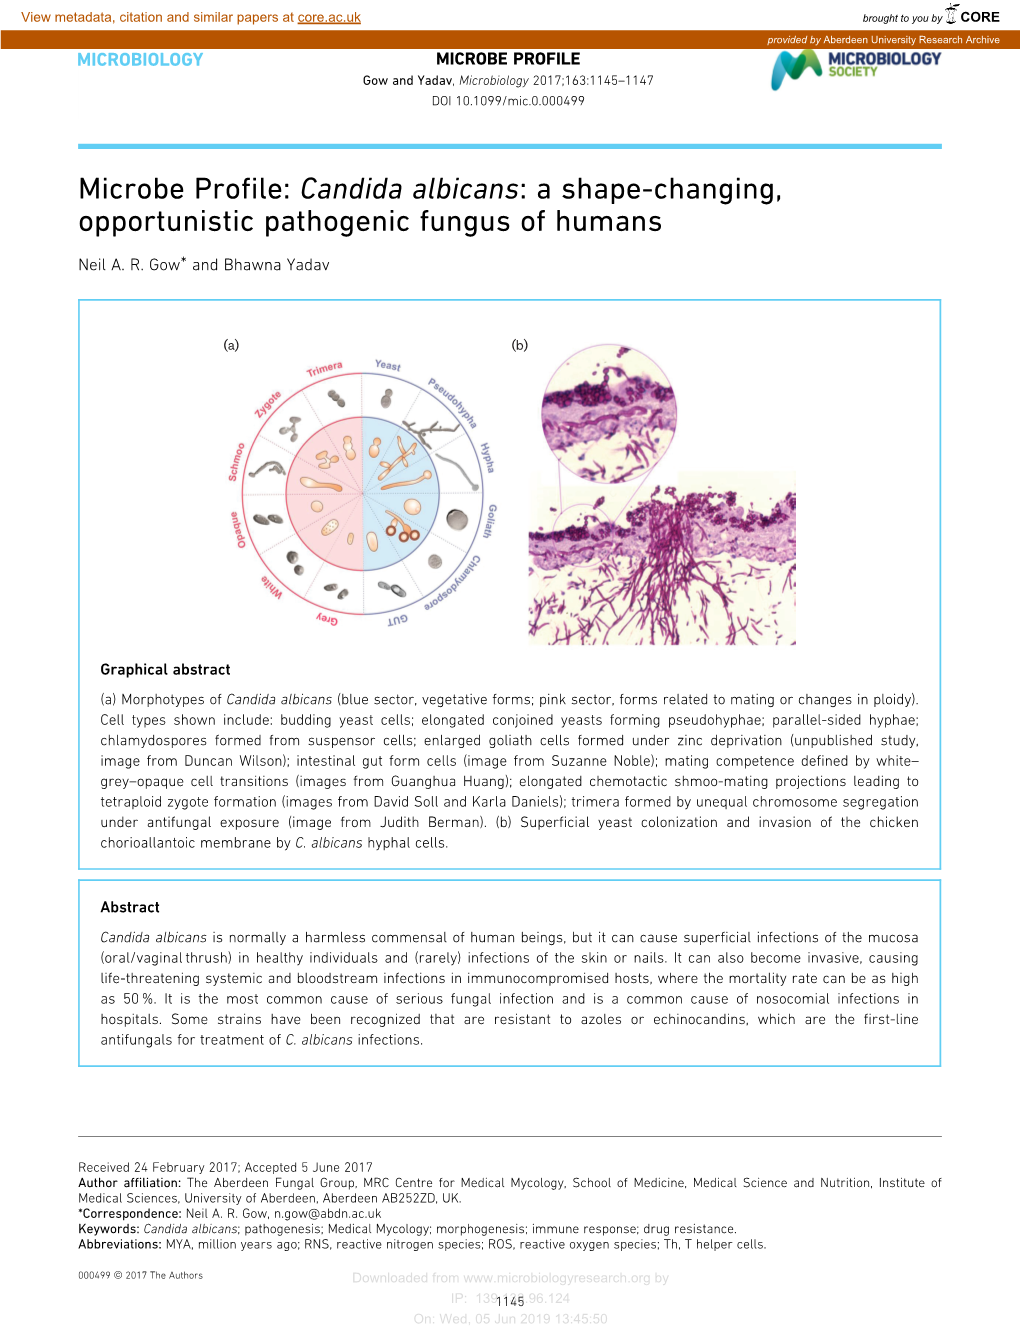 Candida Albicans: a Shape-Changing, Opportunistic Pathogenic Fungus of Humans